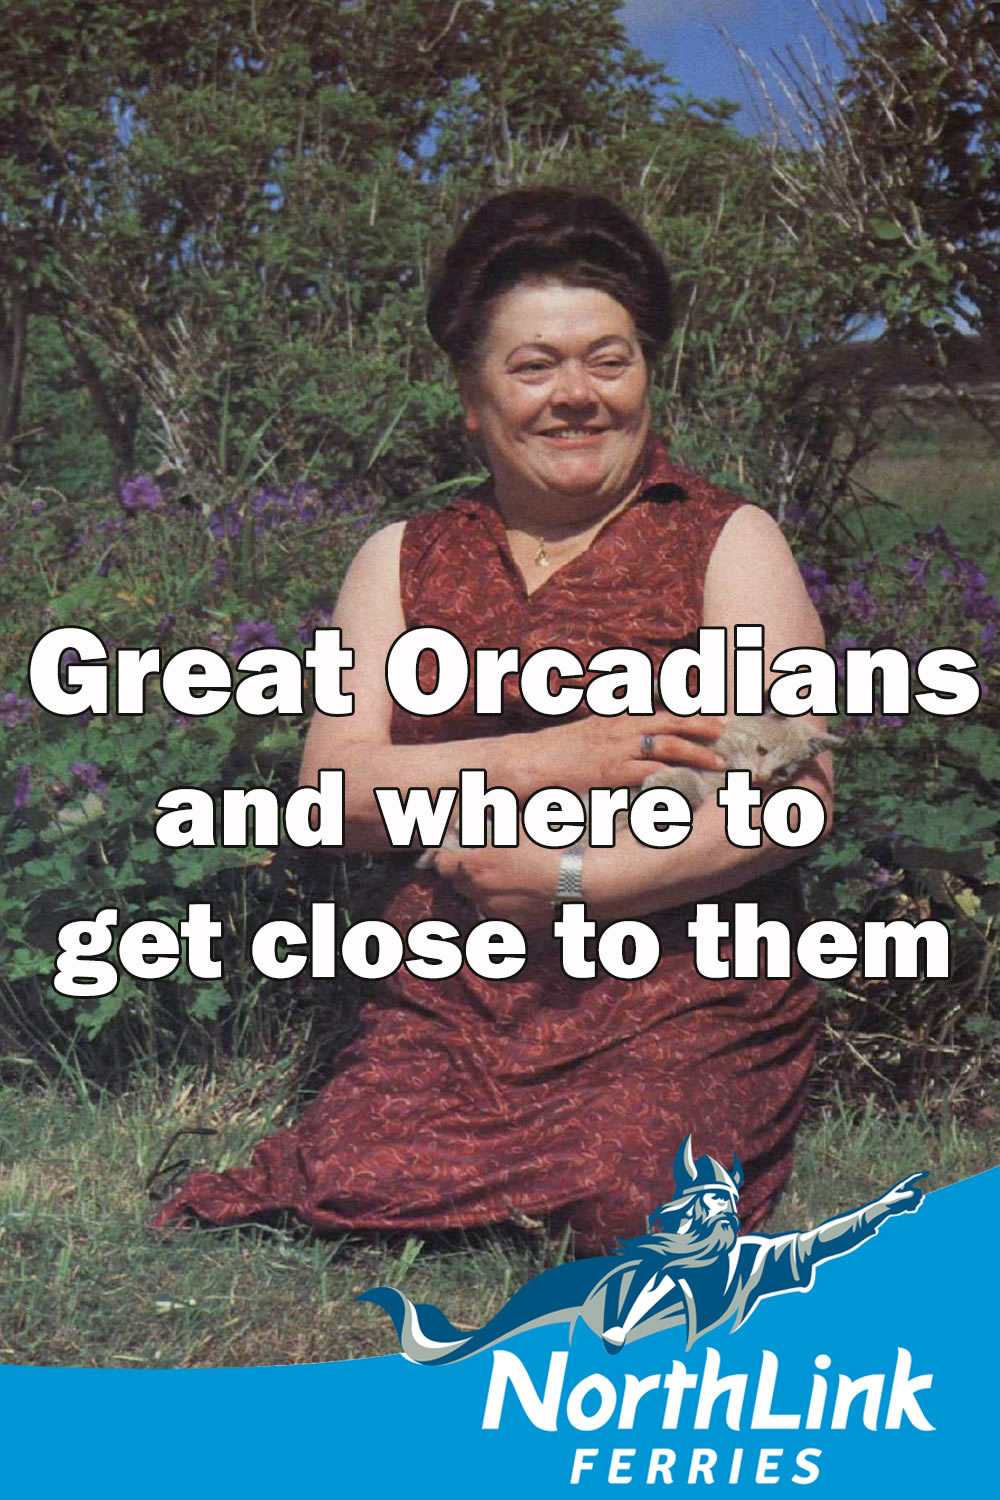 Great Orcadians and where to get close to them